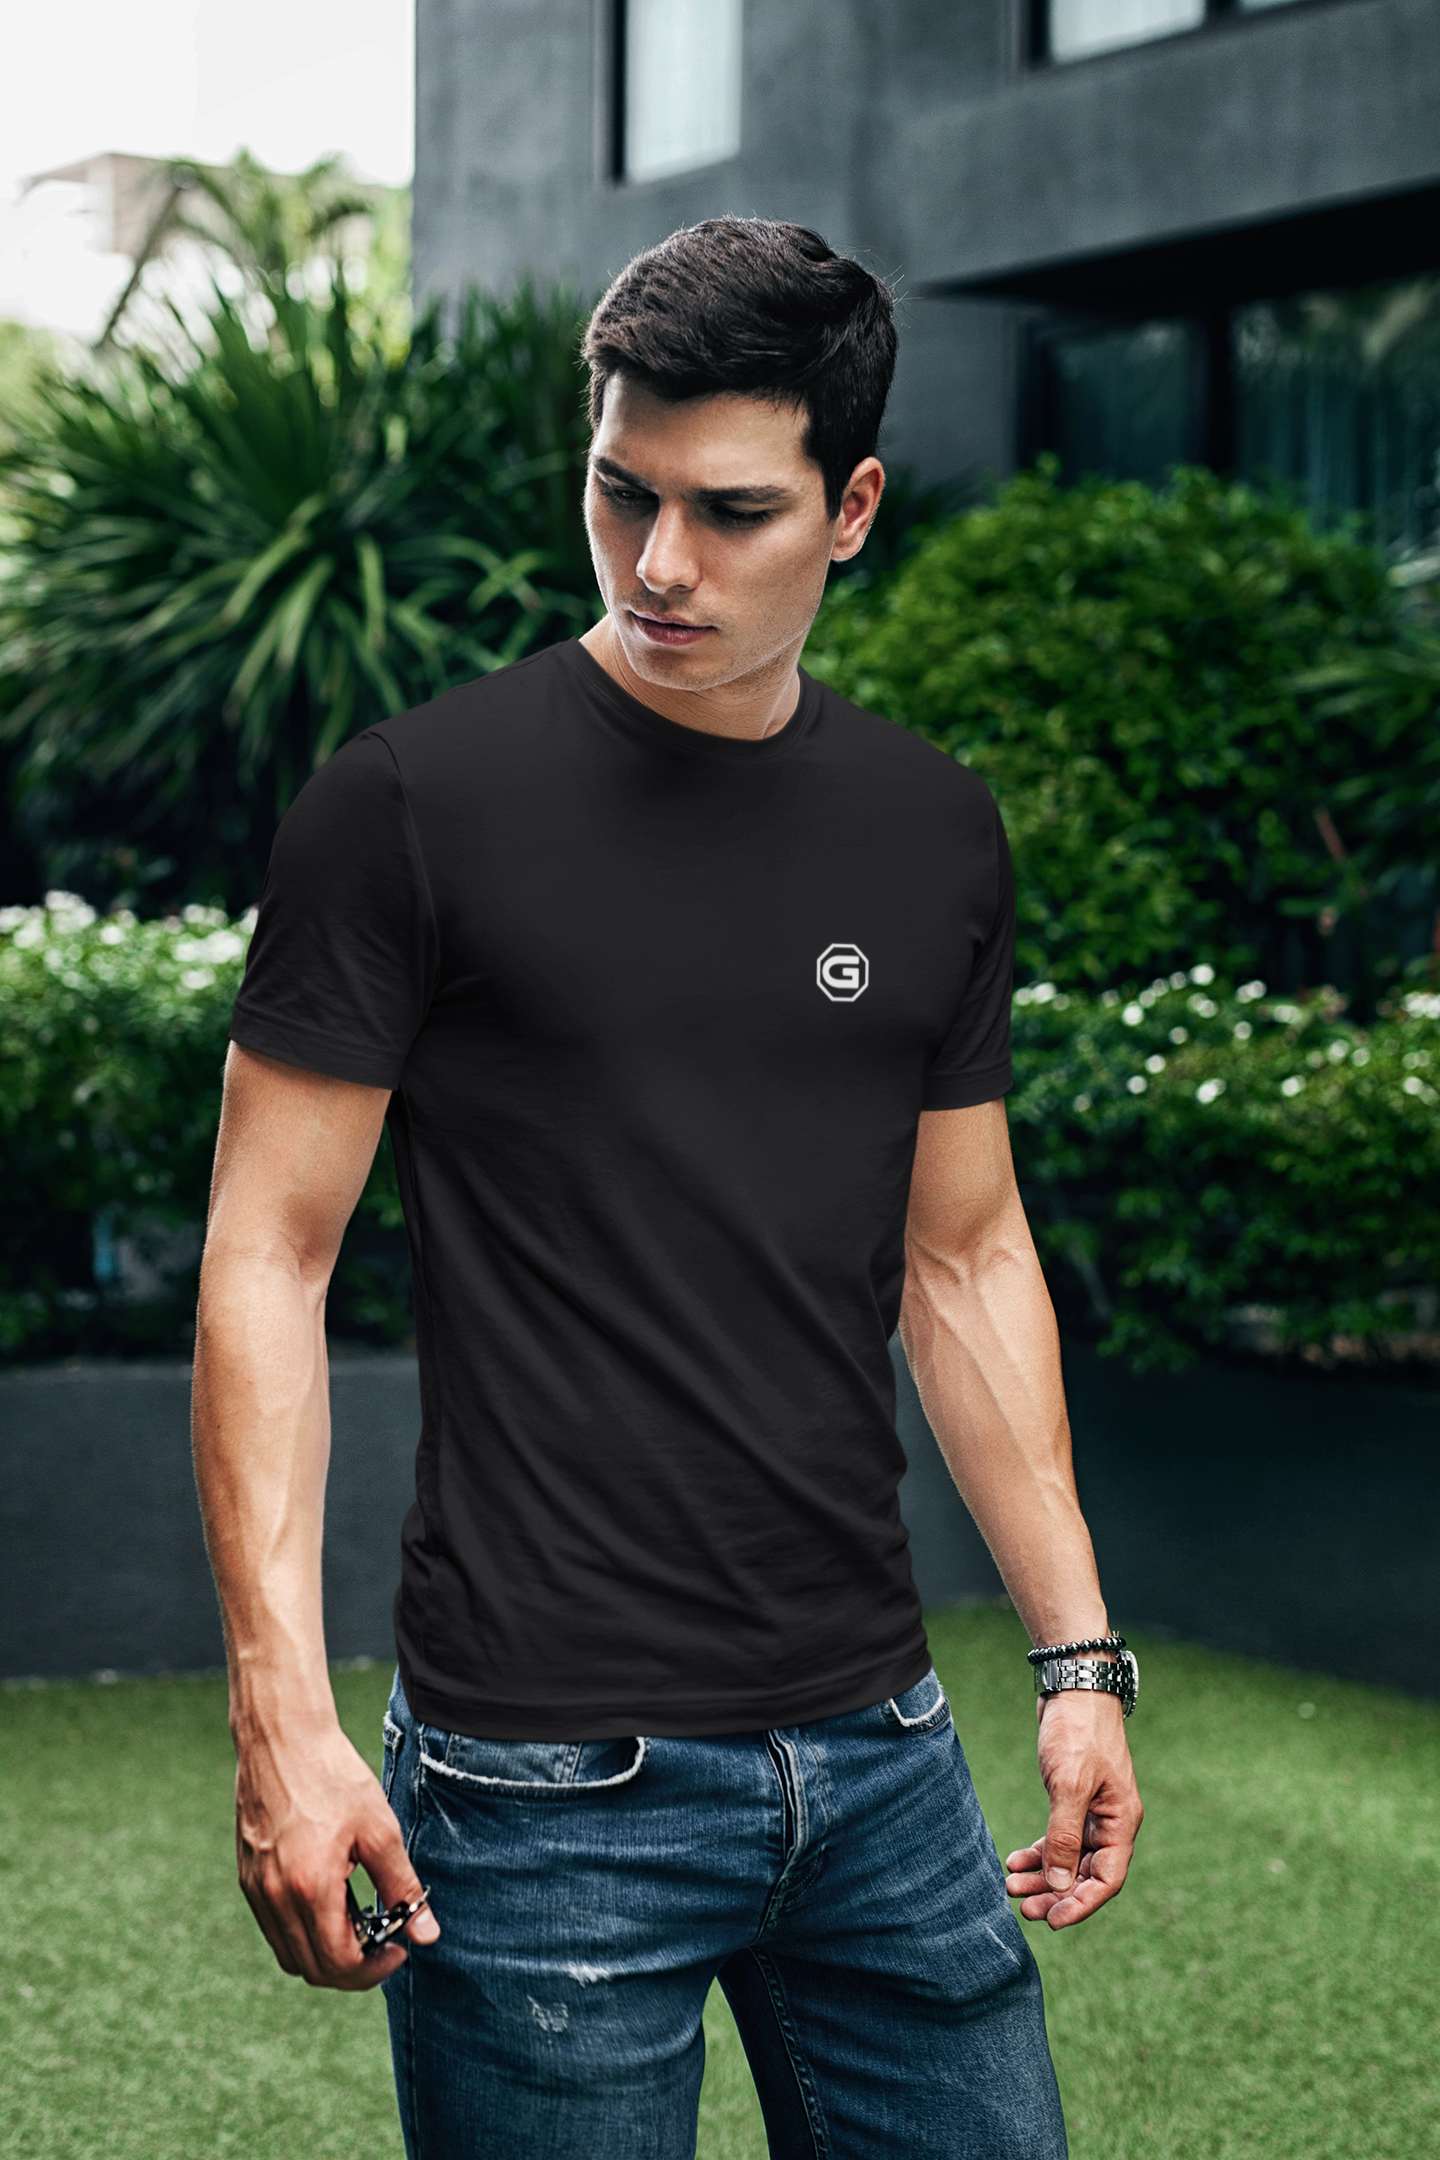 Stylish T shirts for men Active / Leisure Wear | Gymate small G logo black